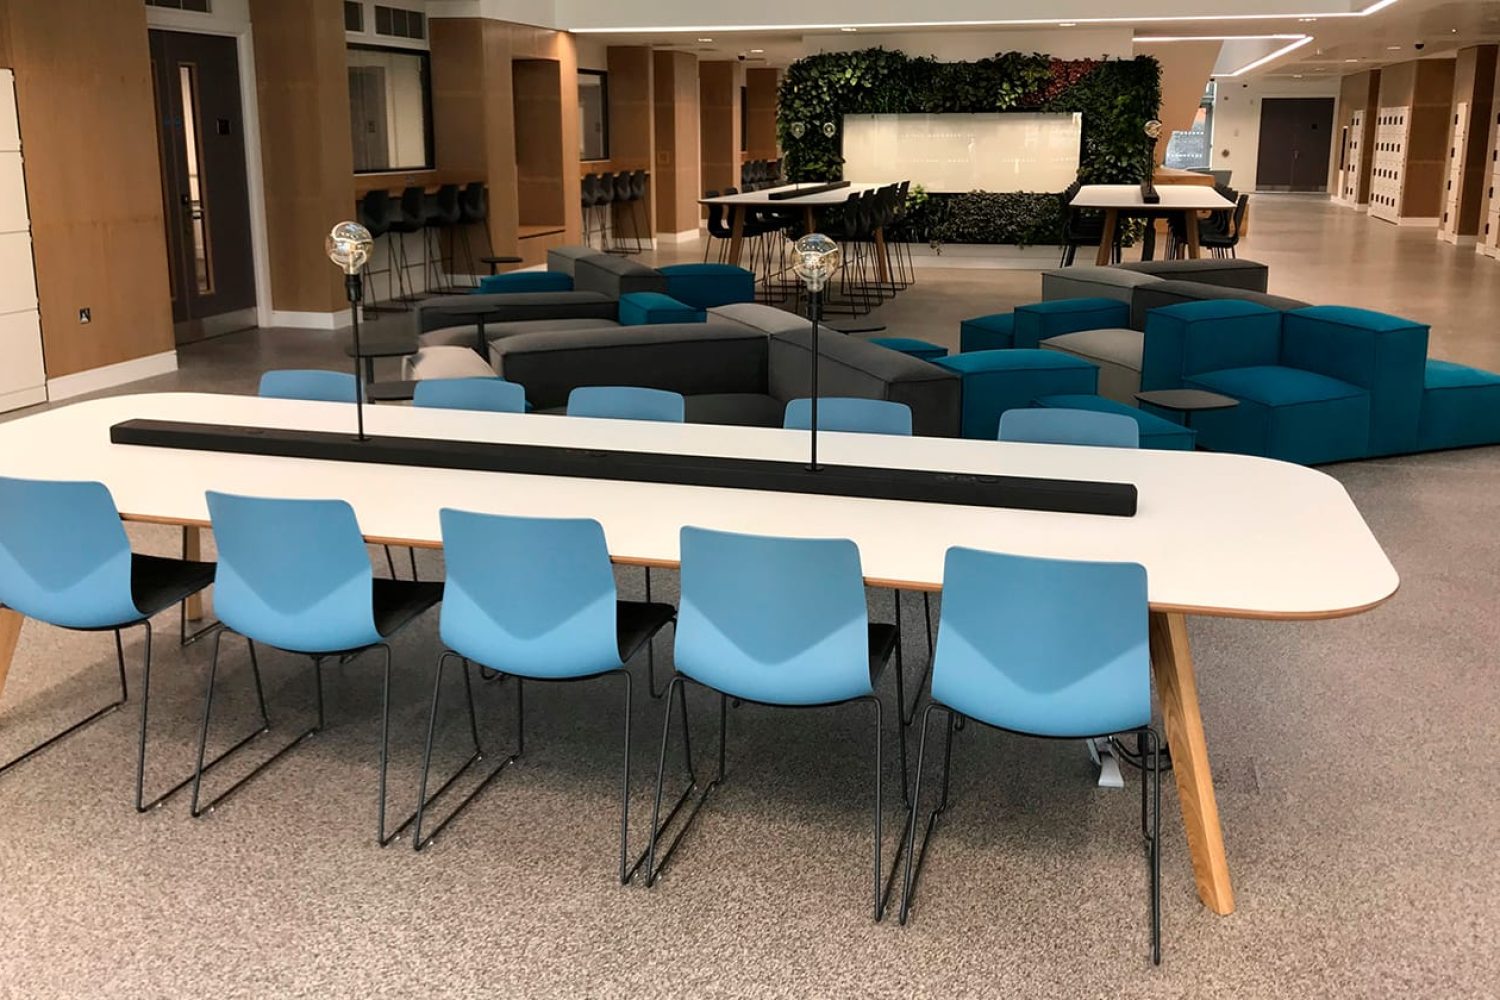 A room with Ocee and Four Design table and chairs in it at Coventry University